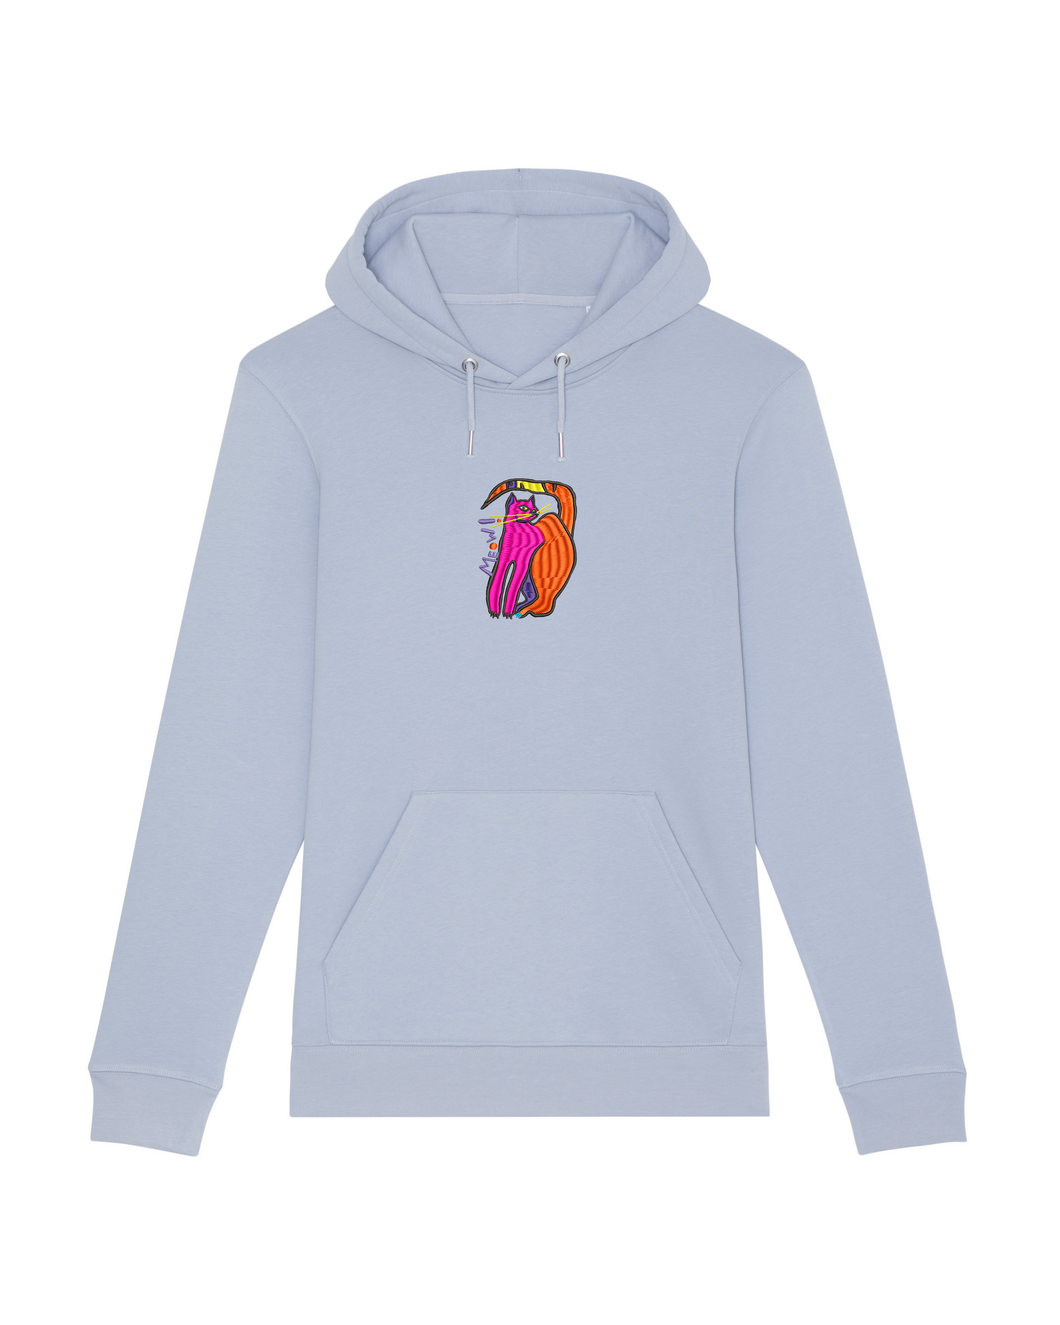 MEOW 🐈- Embroidered UNISEX hoodie